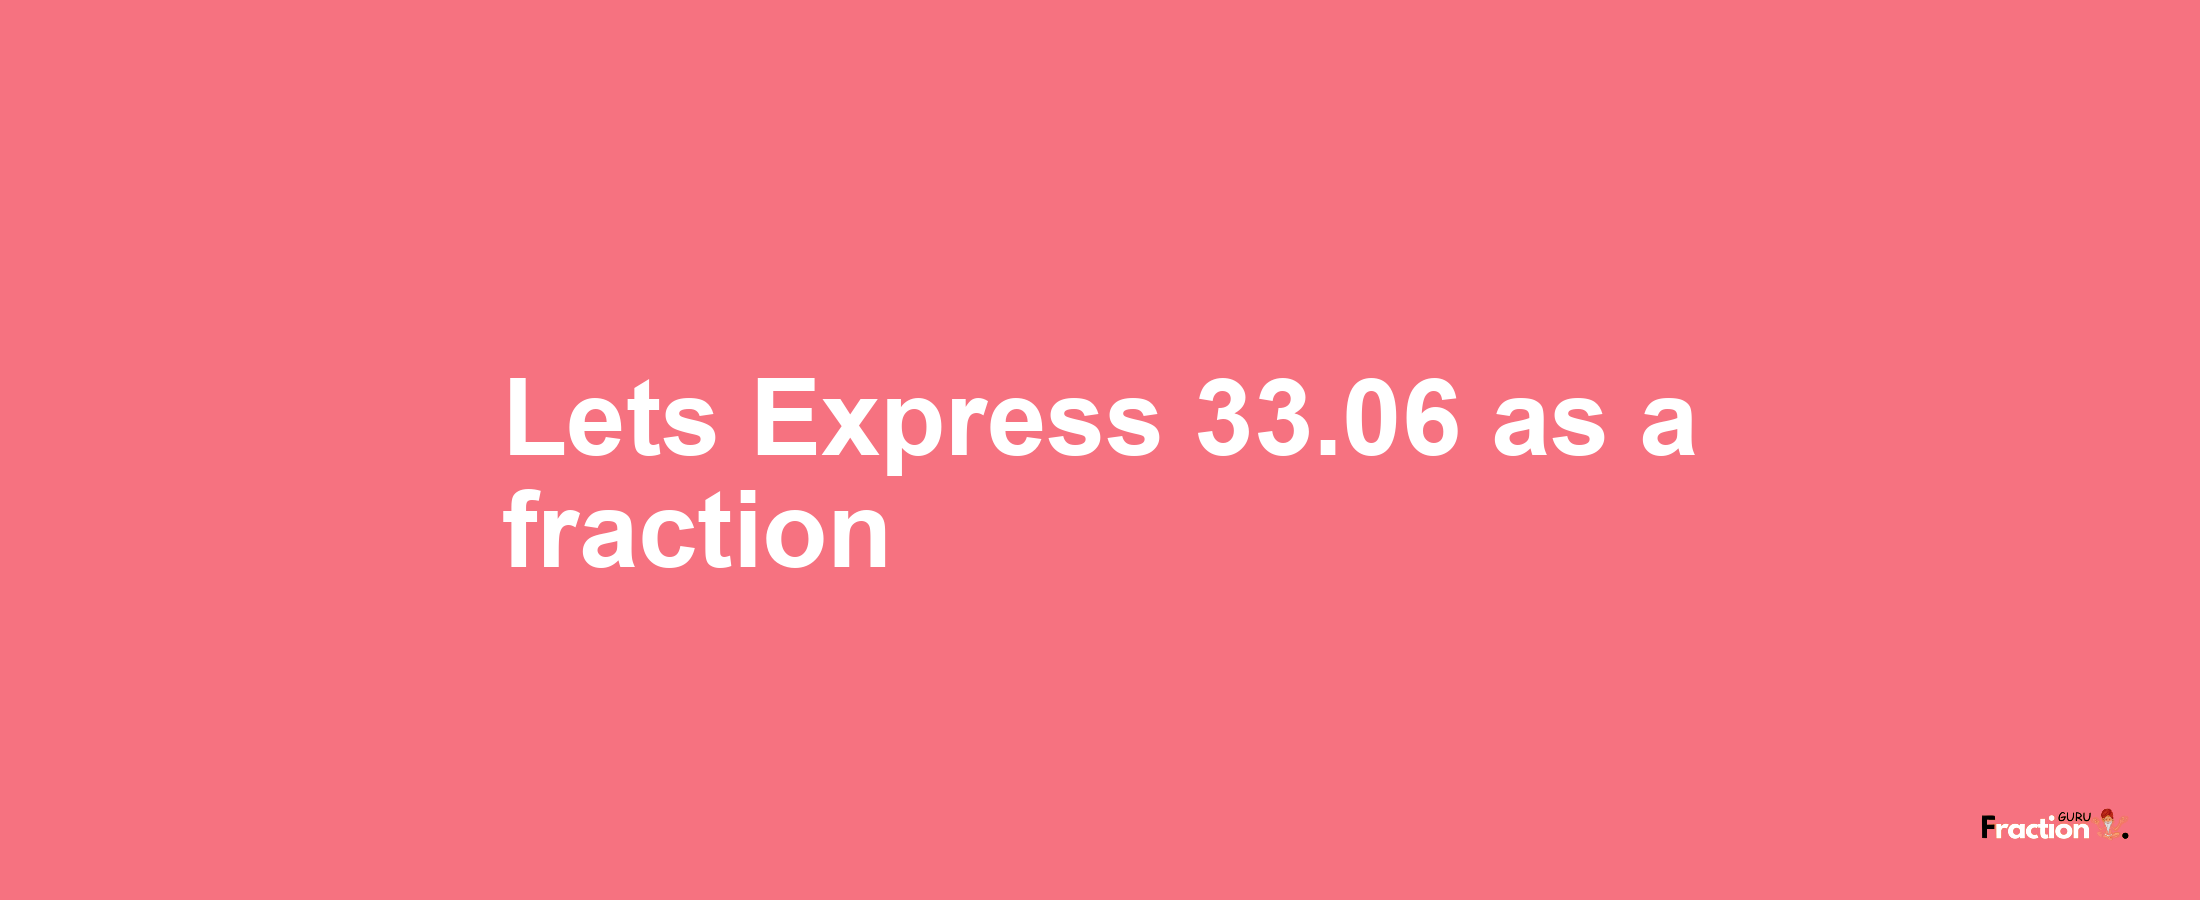 Lets Express 33.06 as afraction